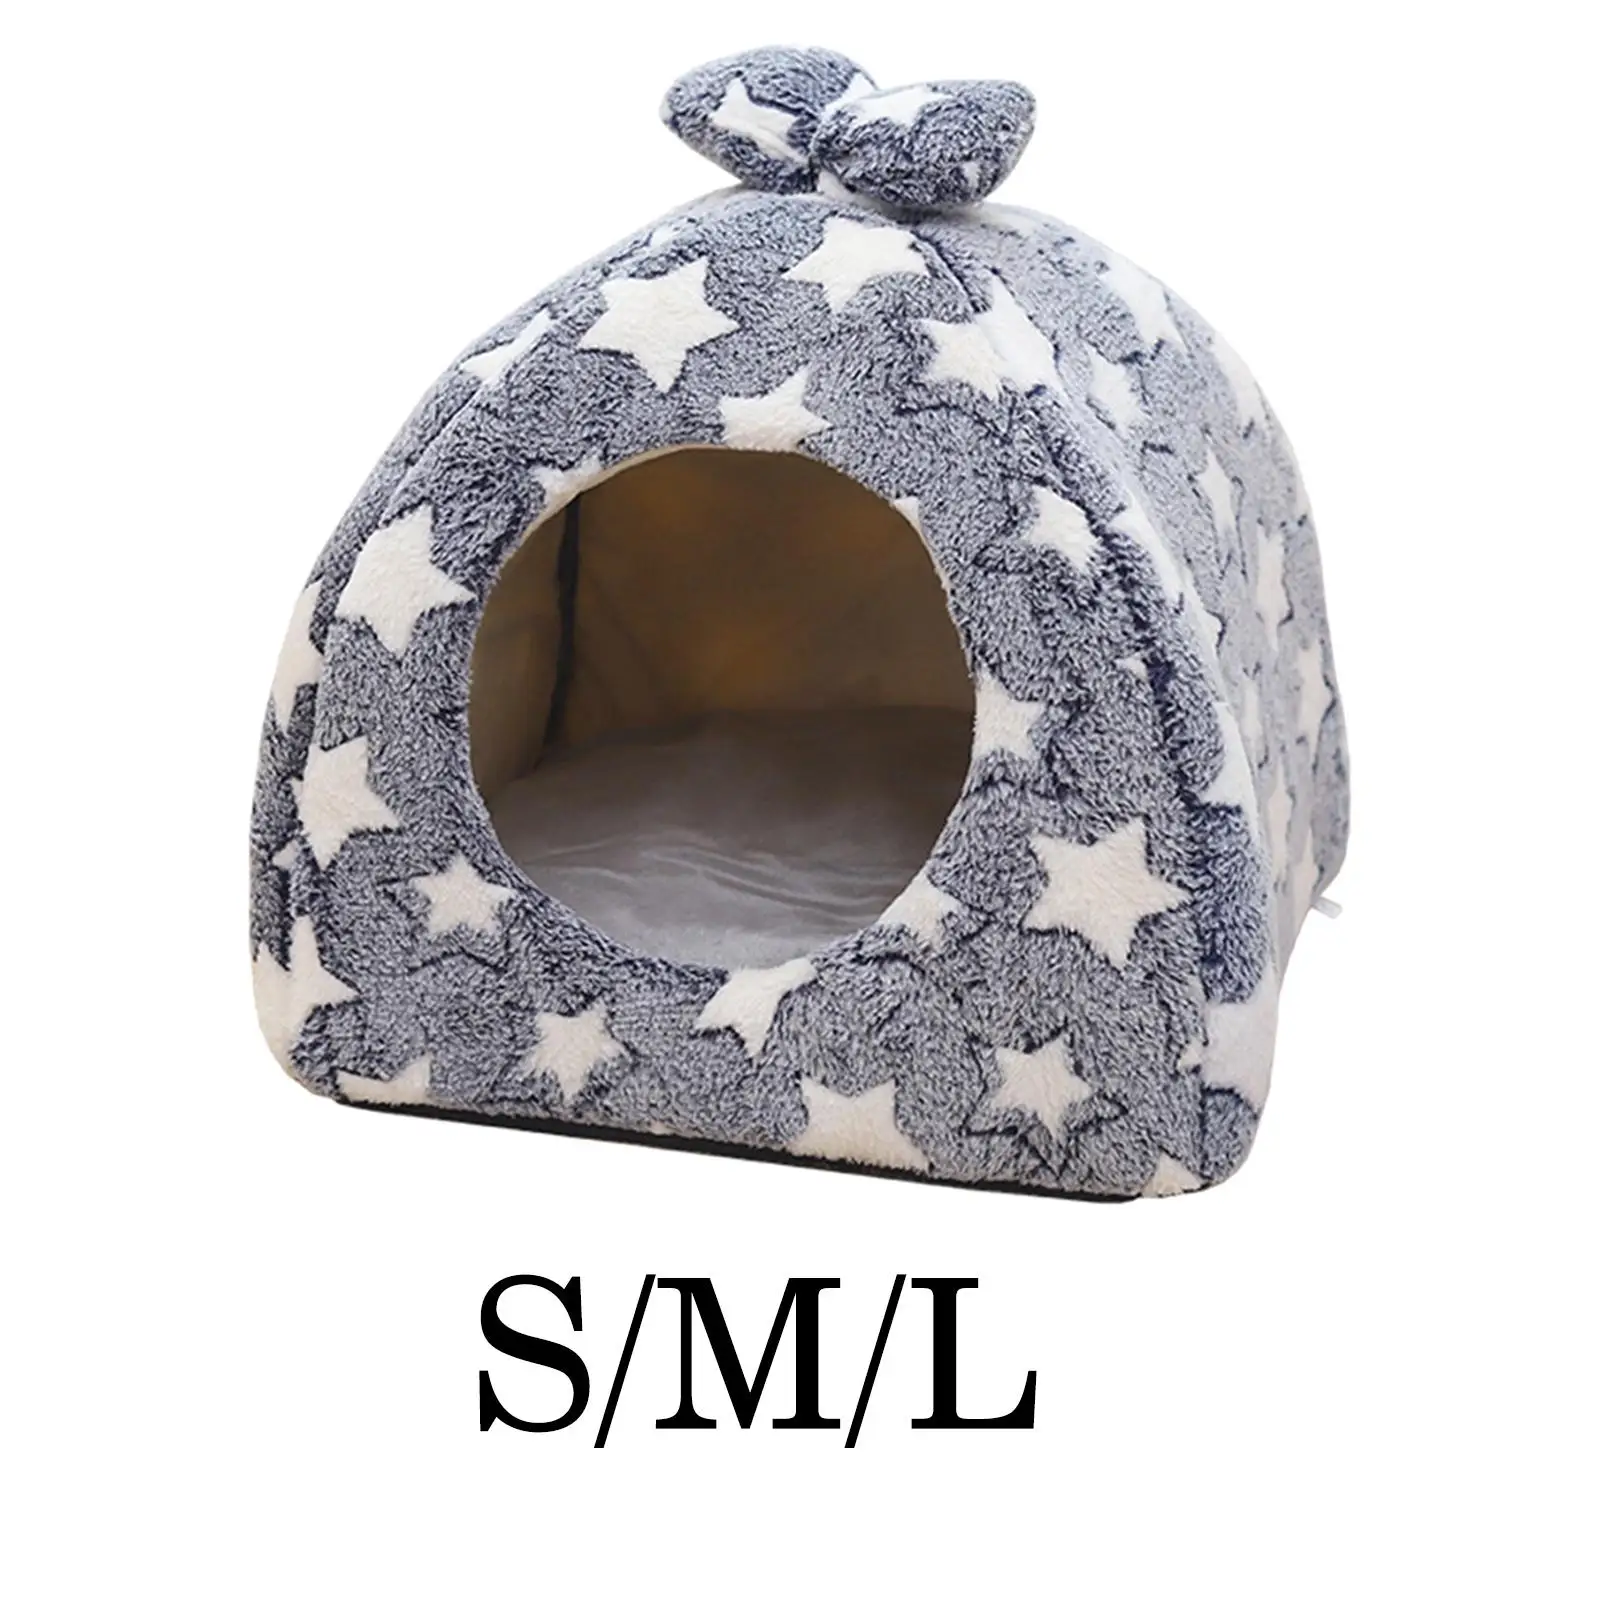 Soft Plush Kittens Cat Bed pet house House Easily Clean Round Entrance